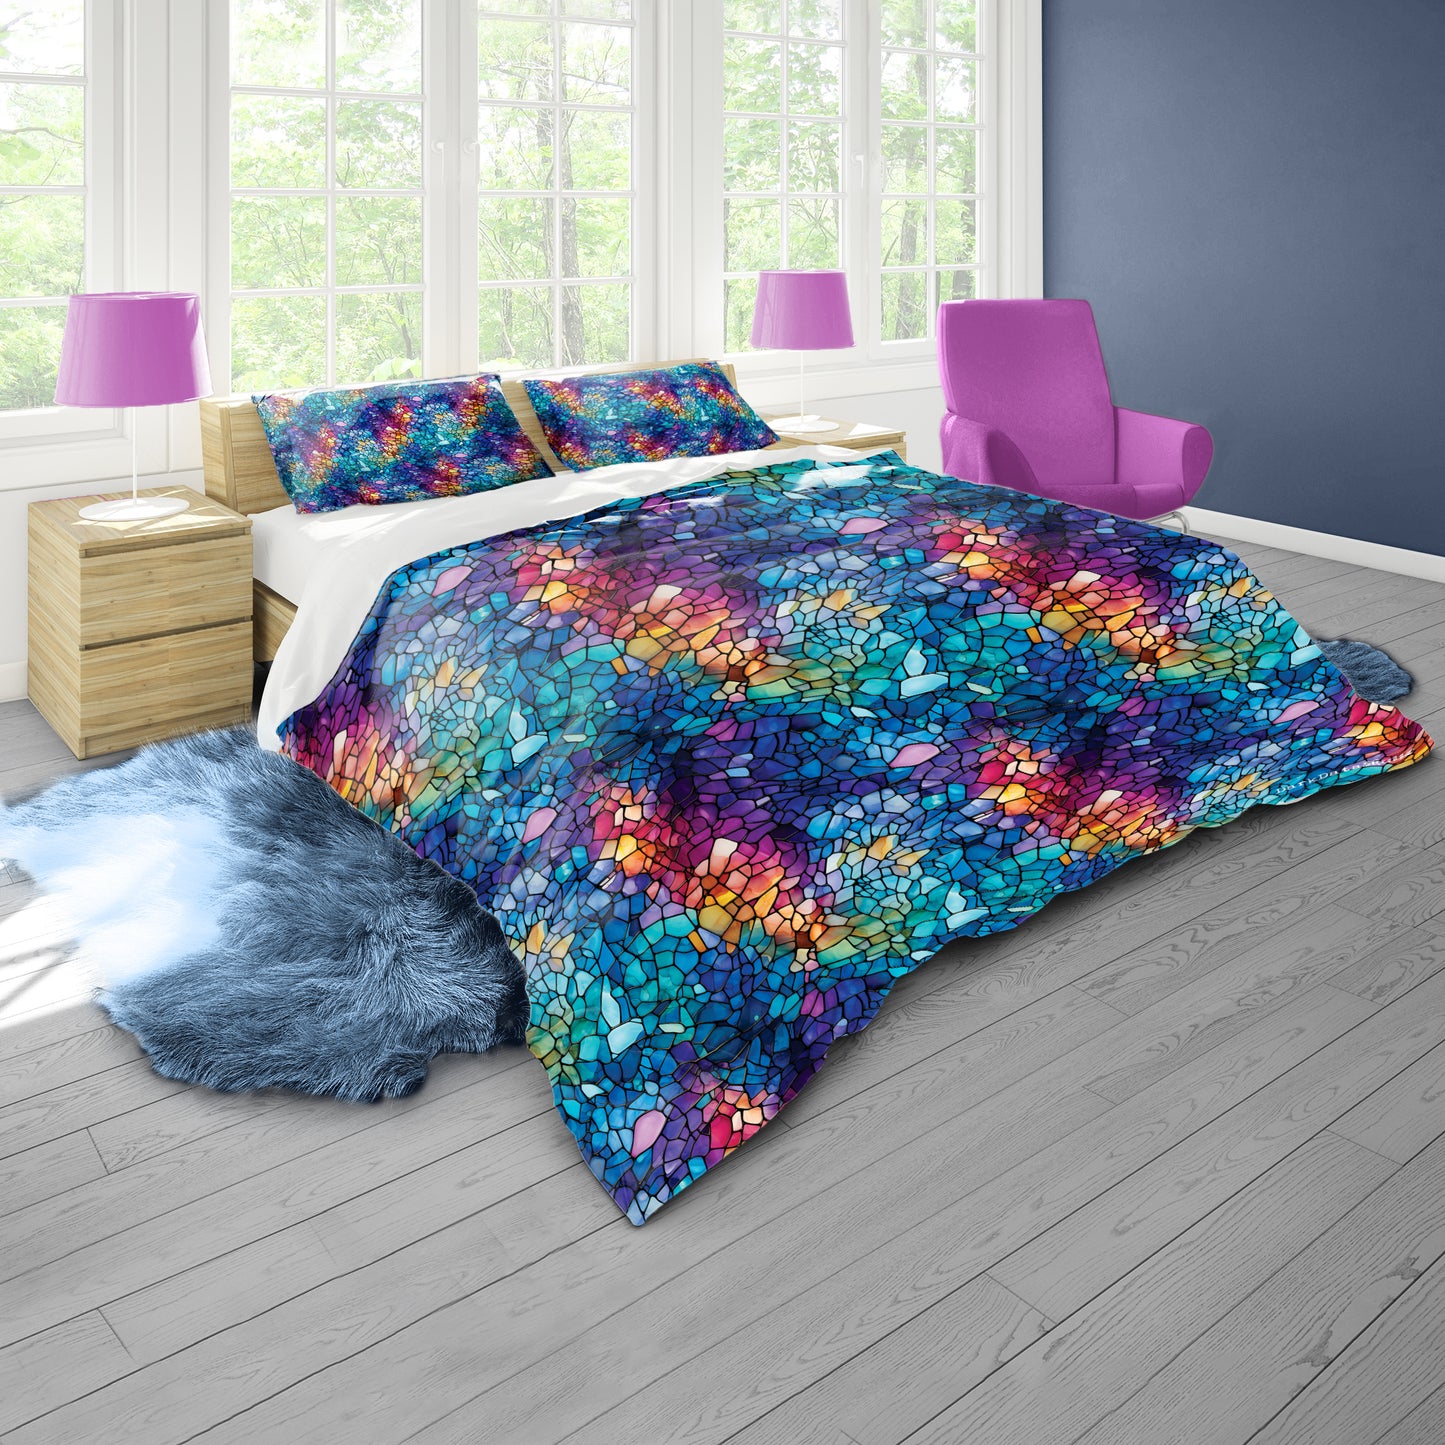 Stained Glass by Wikus Schalkwyk Duvet Cover Set